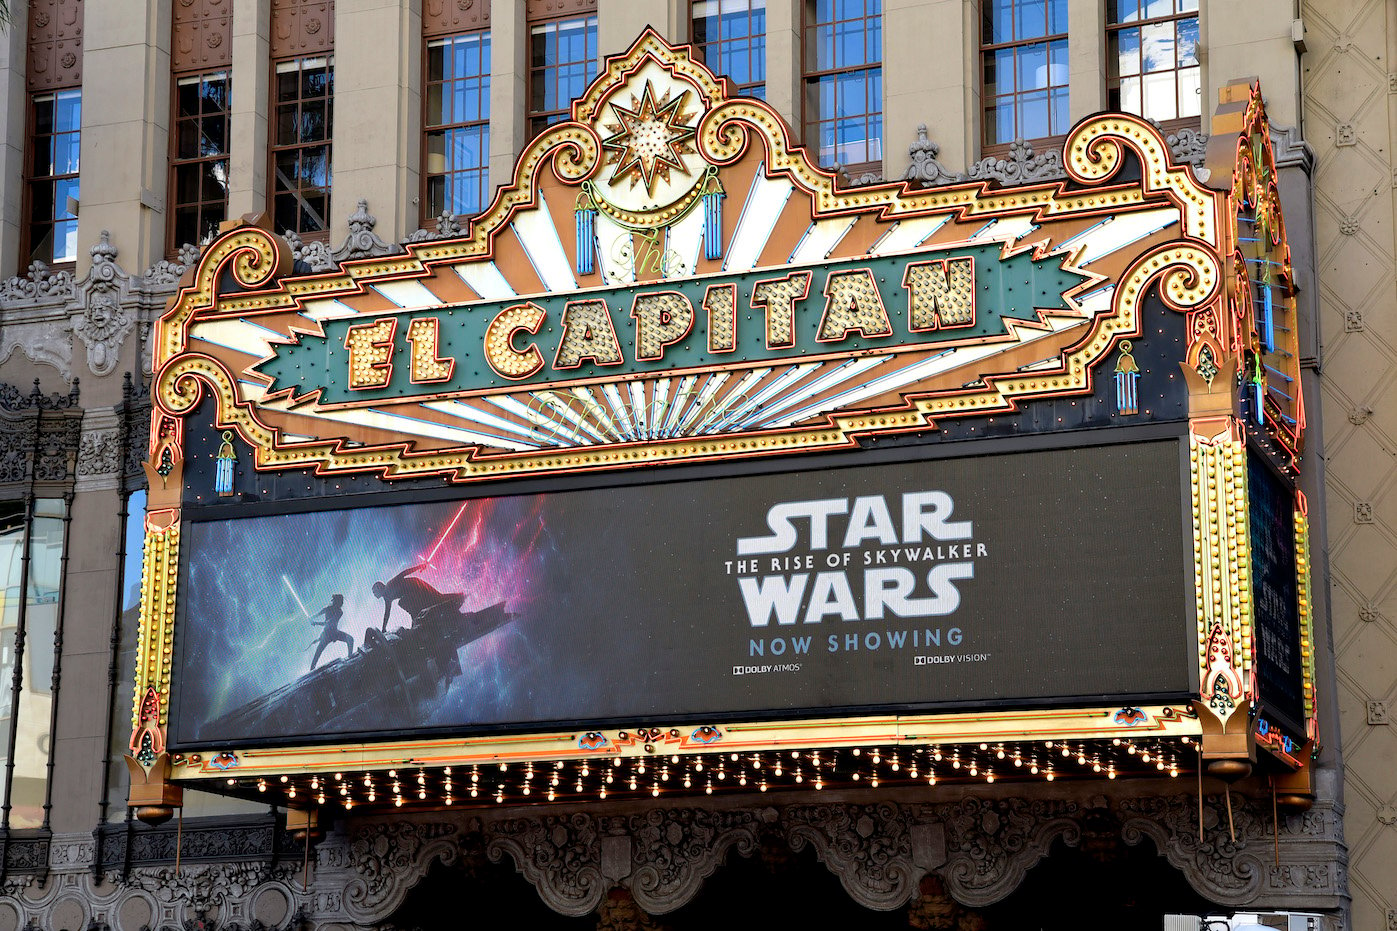 Exterior shot of the marquee of "Star Wars: The Rise Of Skywalker" at the El Capitan Theater